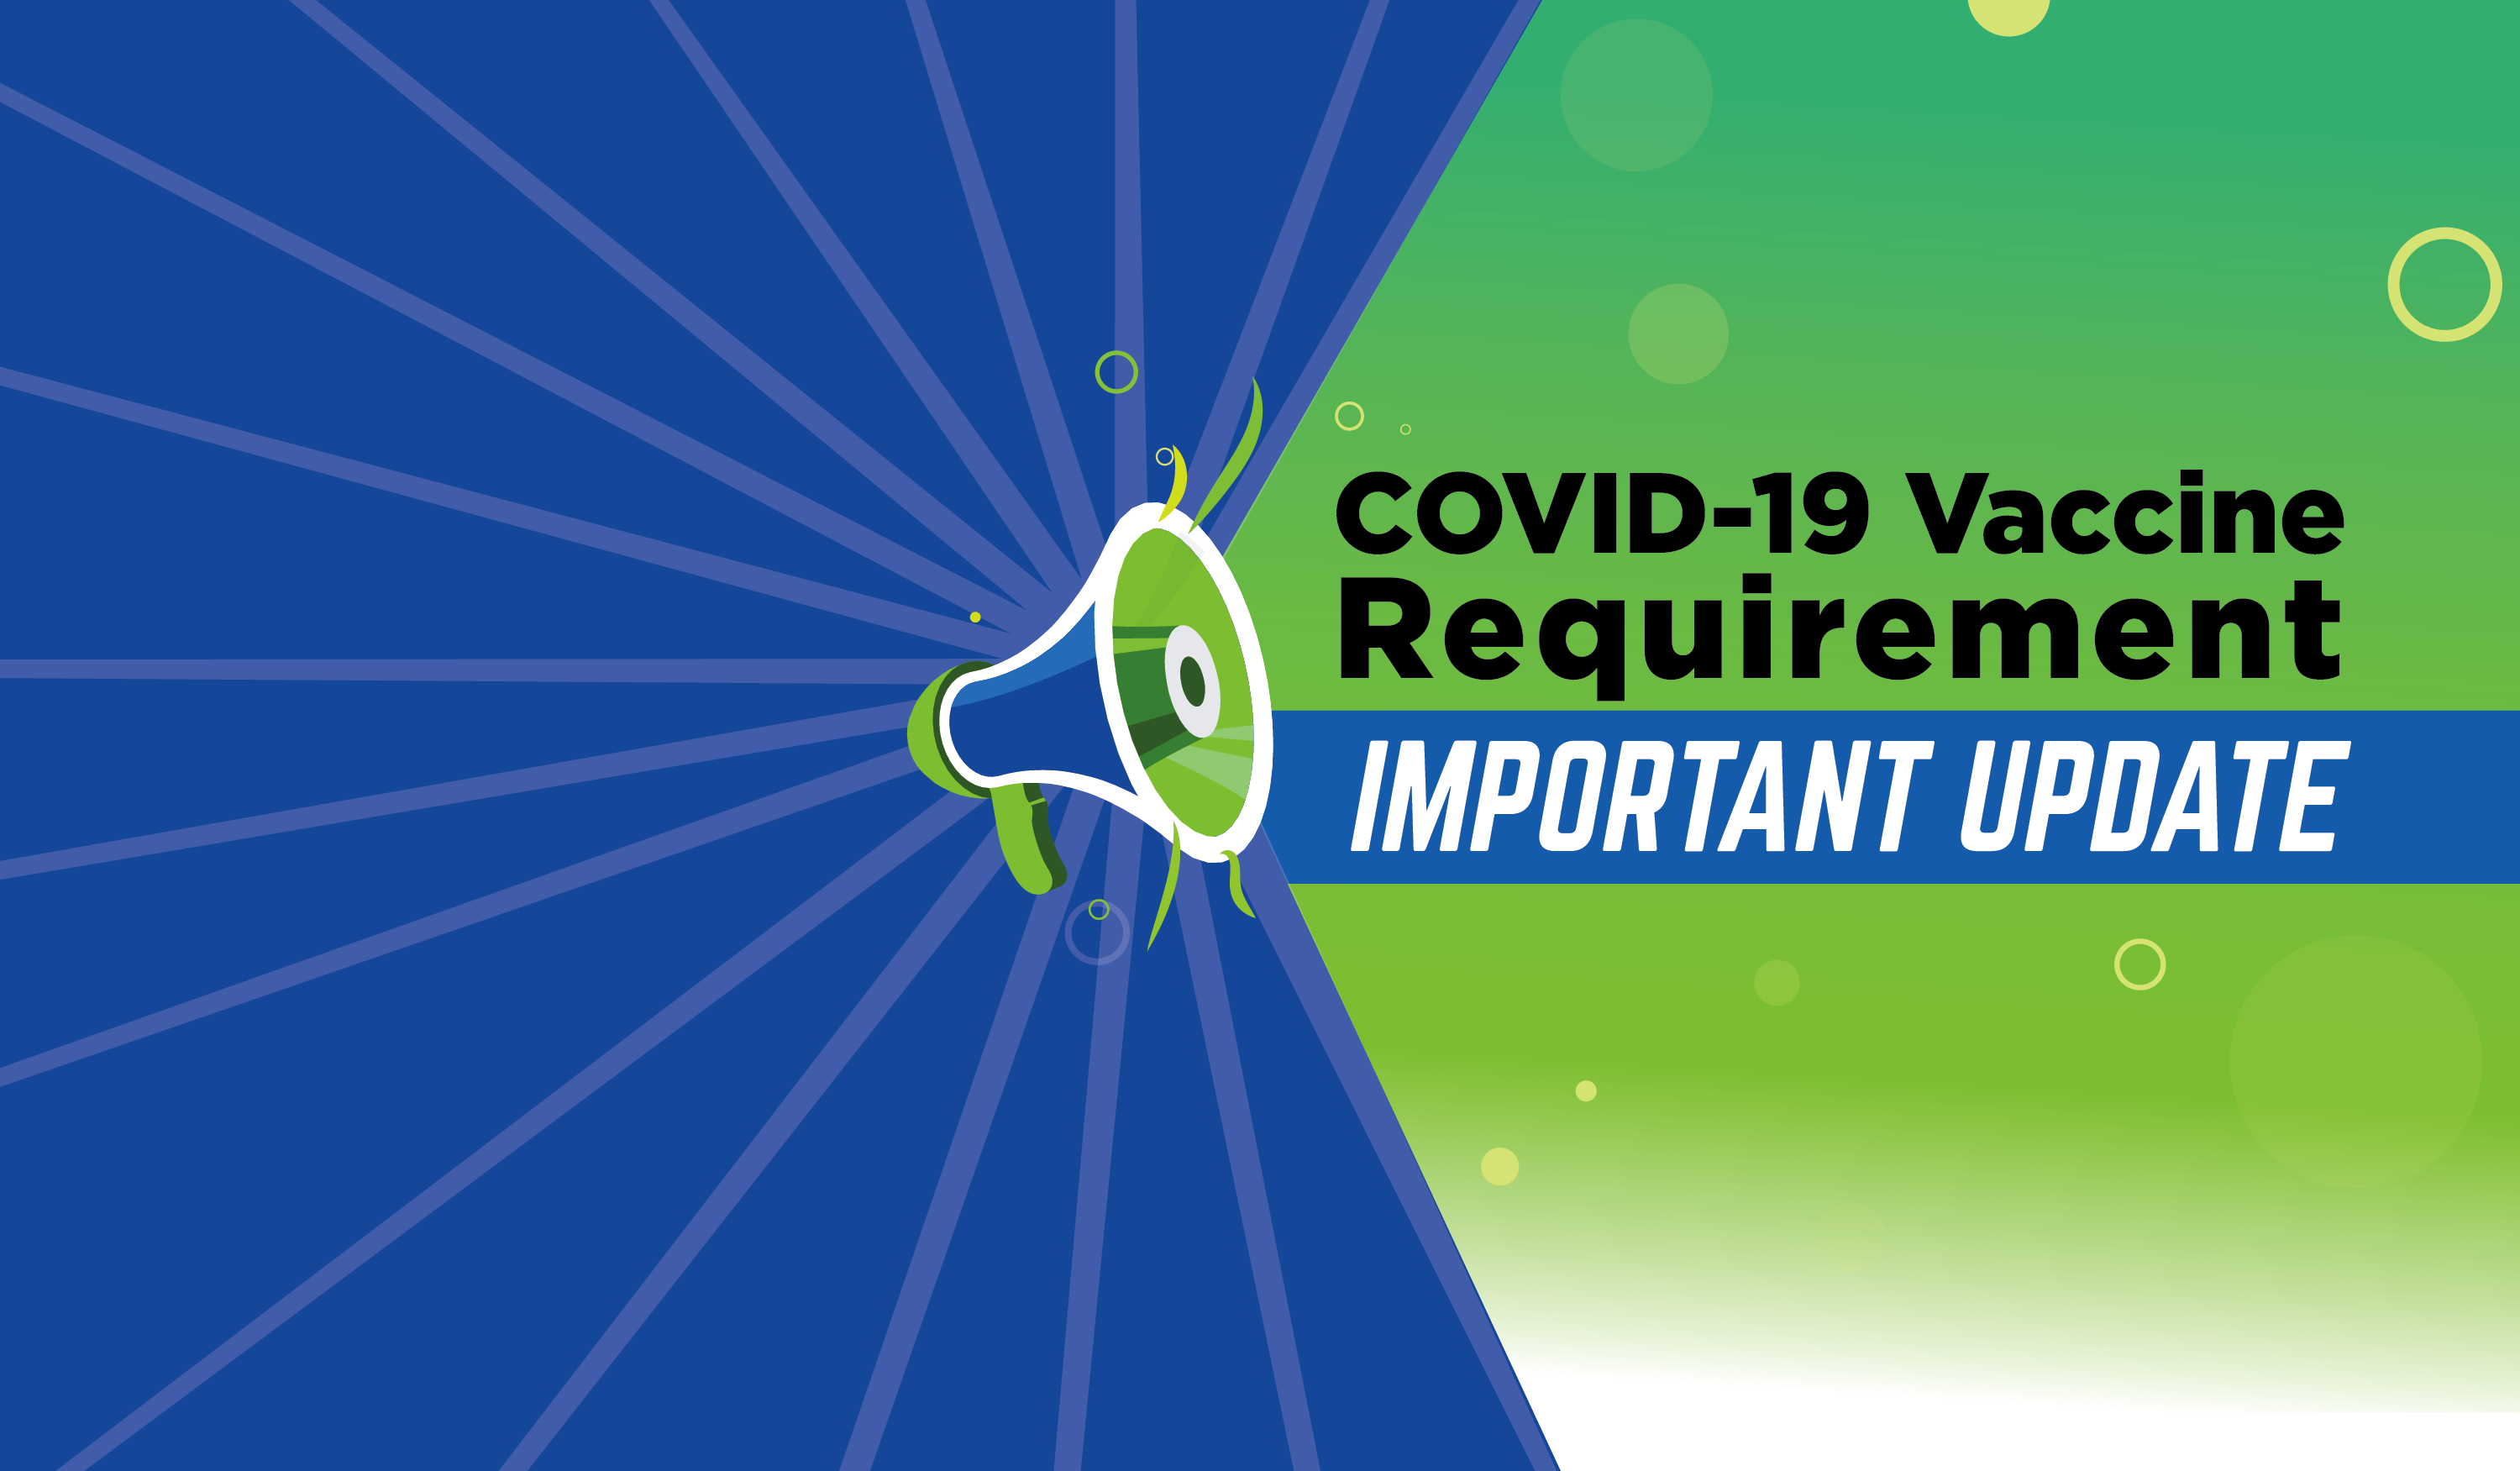 COVID-19 Vaccine Requirement - Important Update